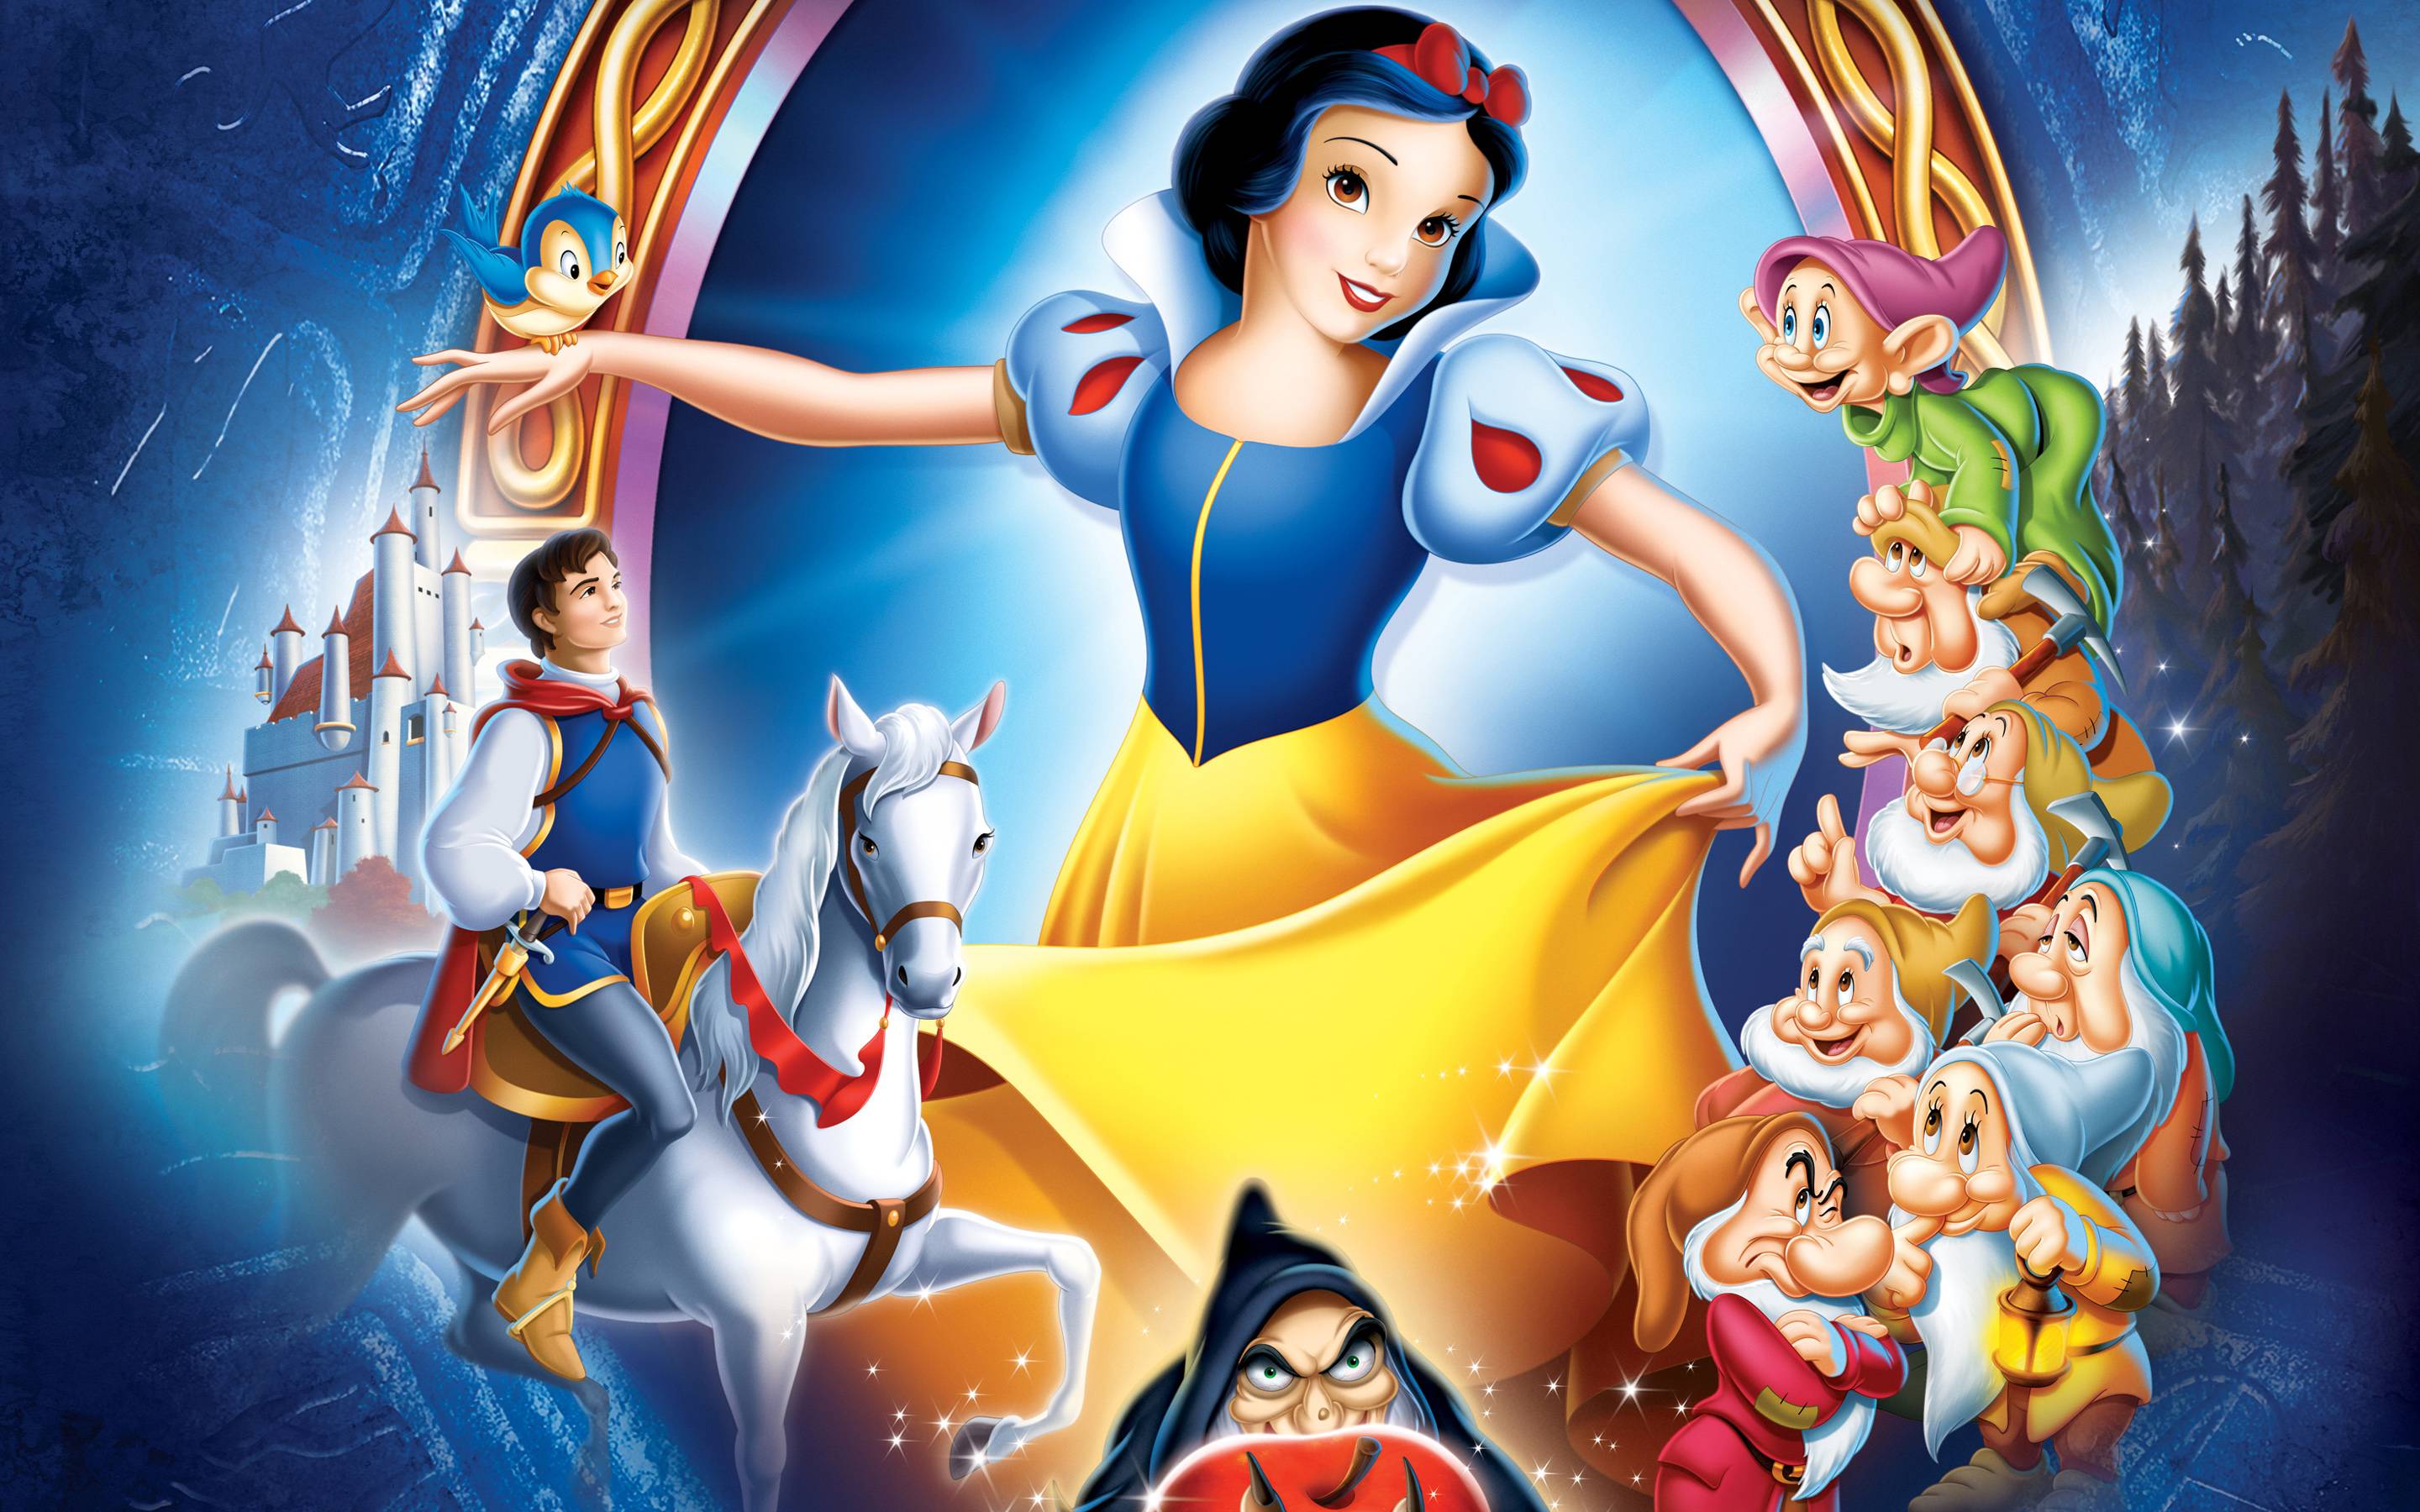 Kids Cartoons: Snow white and the seven dwarfs story full video